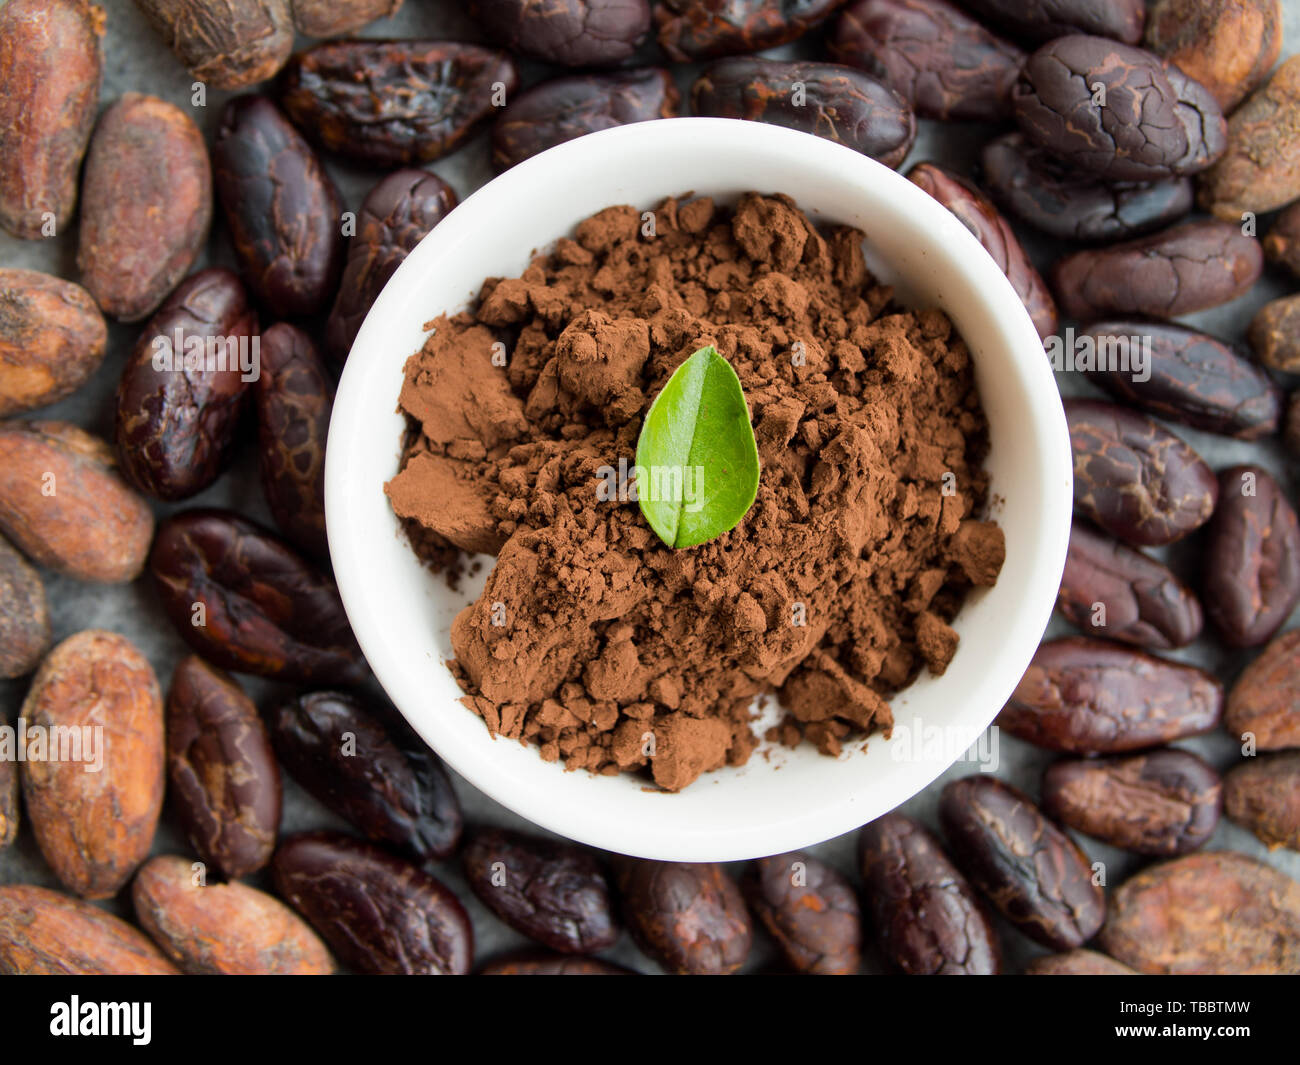 Cocoa powder in a small bowl, roasted cocoa beans around, top view. Stock Photo